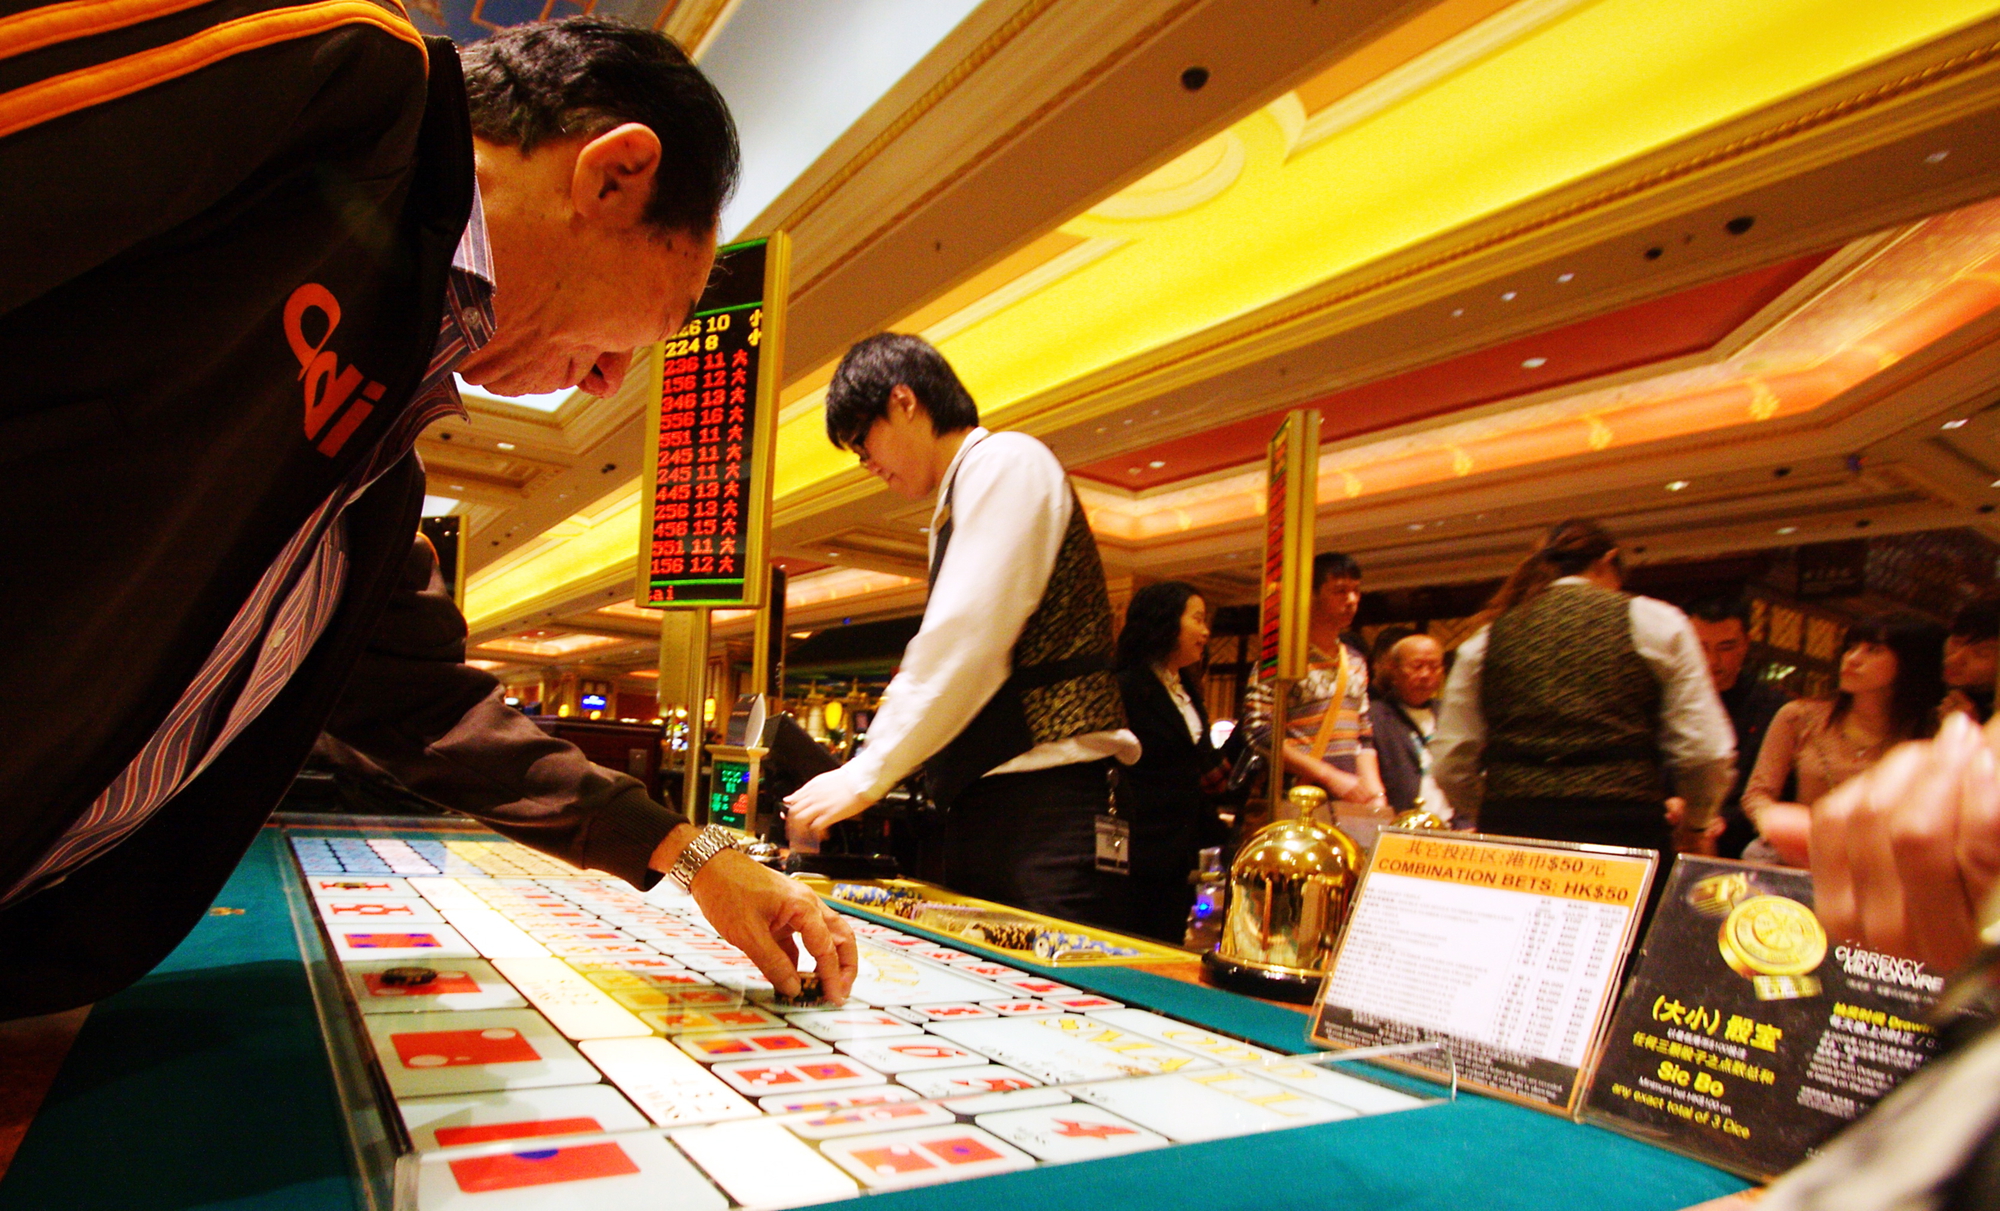 Tourists gamble in the casino of the Venetian Macao Resort Hotel, owned by Las Vegas Sands Corp., in Macau, China, 9 December 2009.